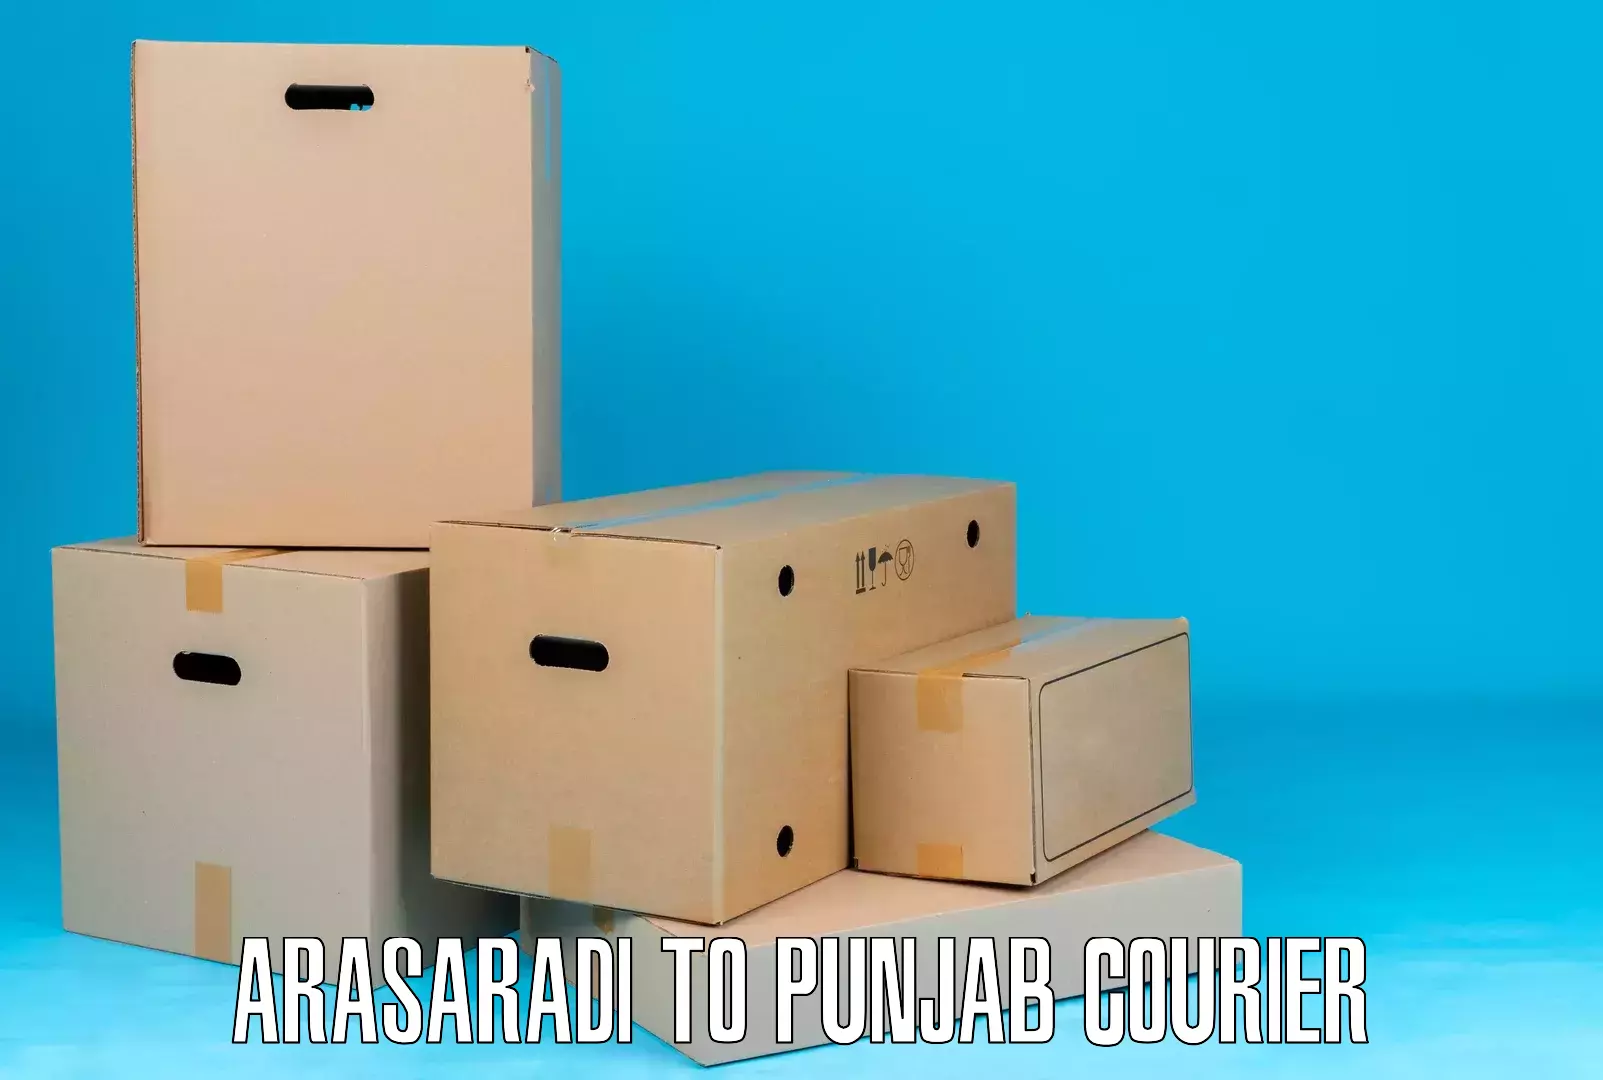 Residential courier service in Arasaradi to Samana